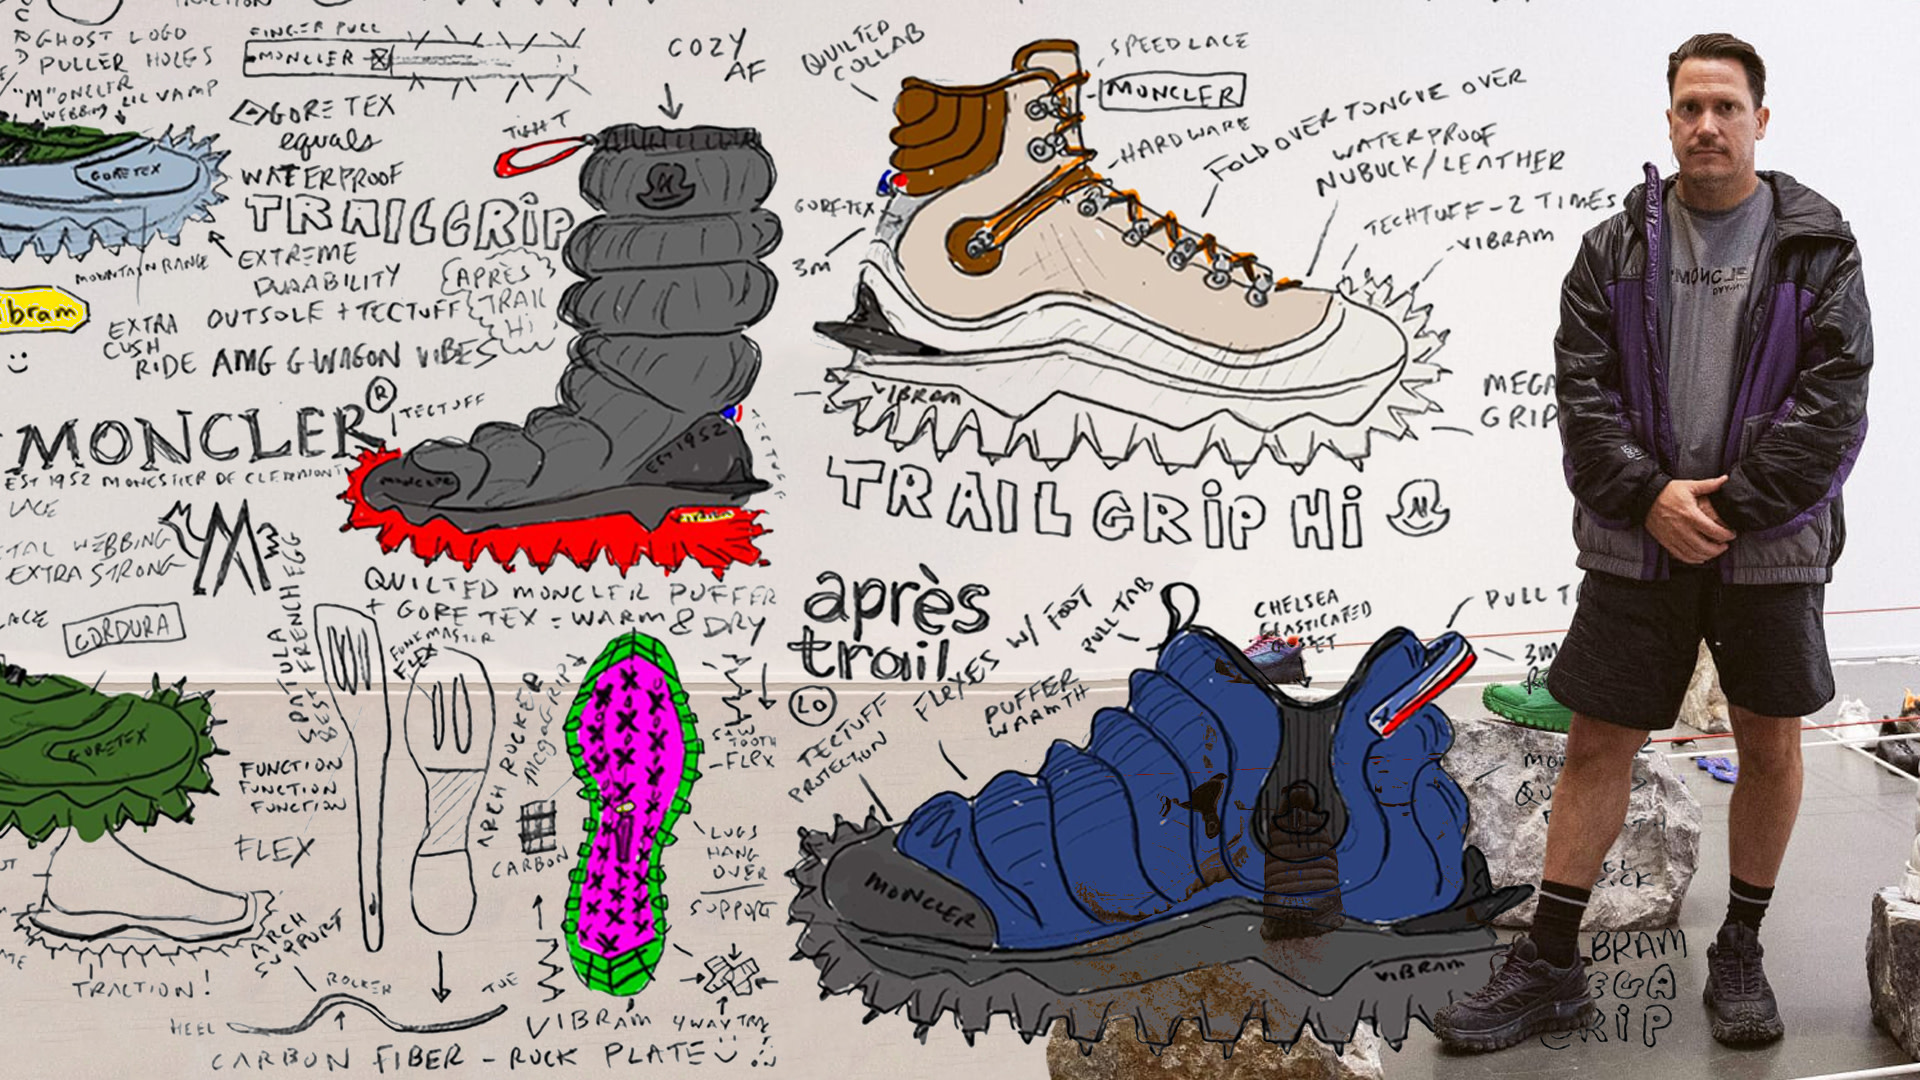 Nathan VanHook, the Trailgrip Sneaker, and Moncler's New Vision for Footwear